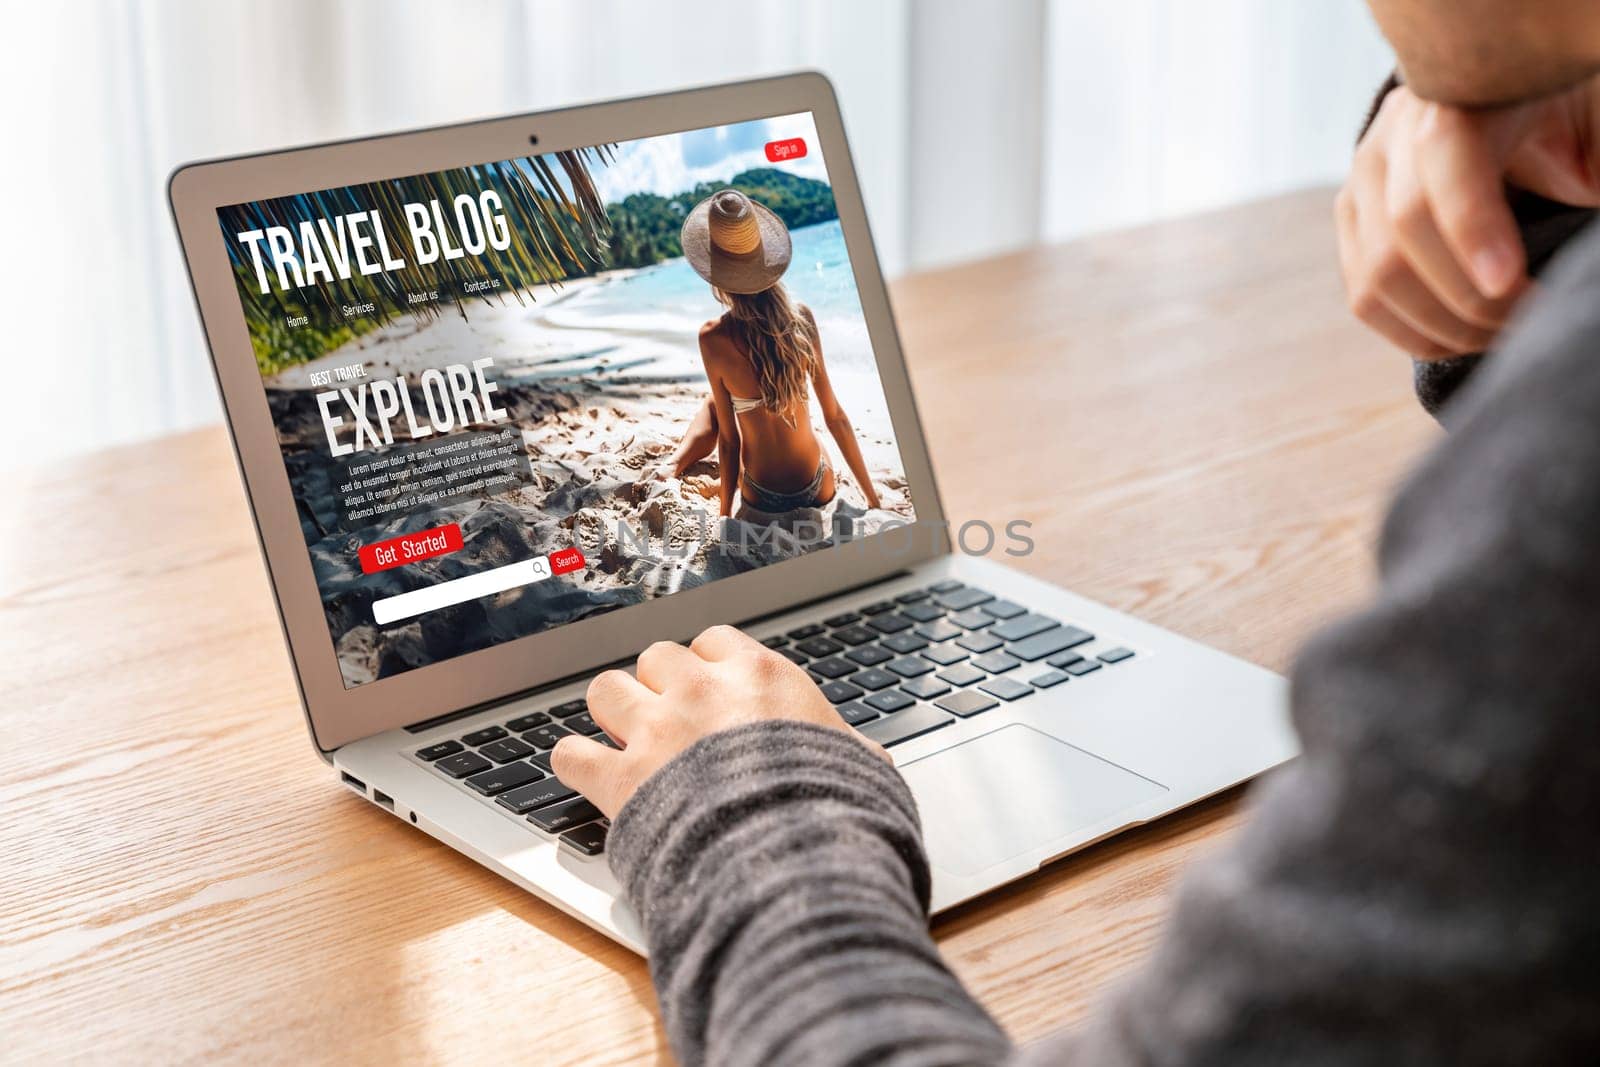 Online travel blog website provide travel tips and information on social media snugly where people can post, write and react to travel application